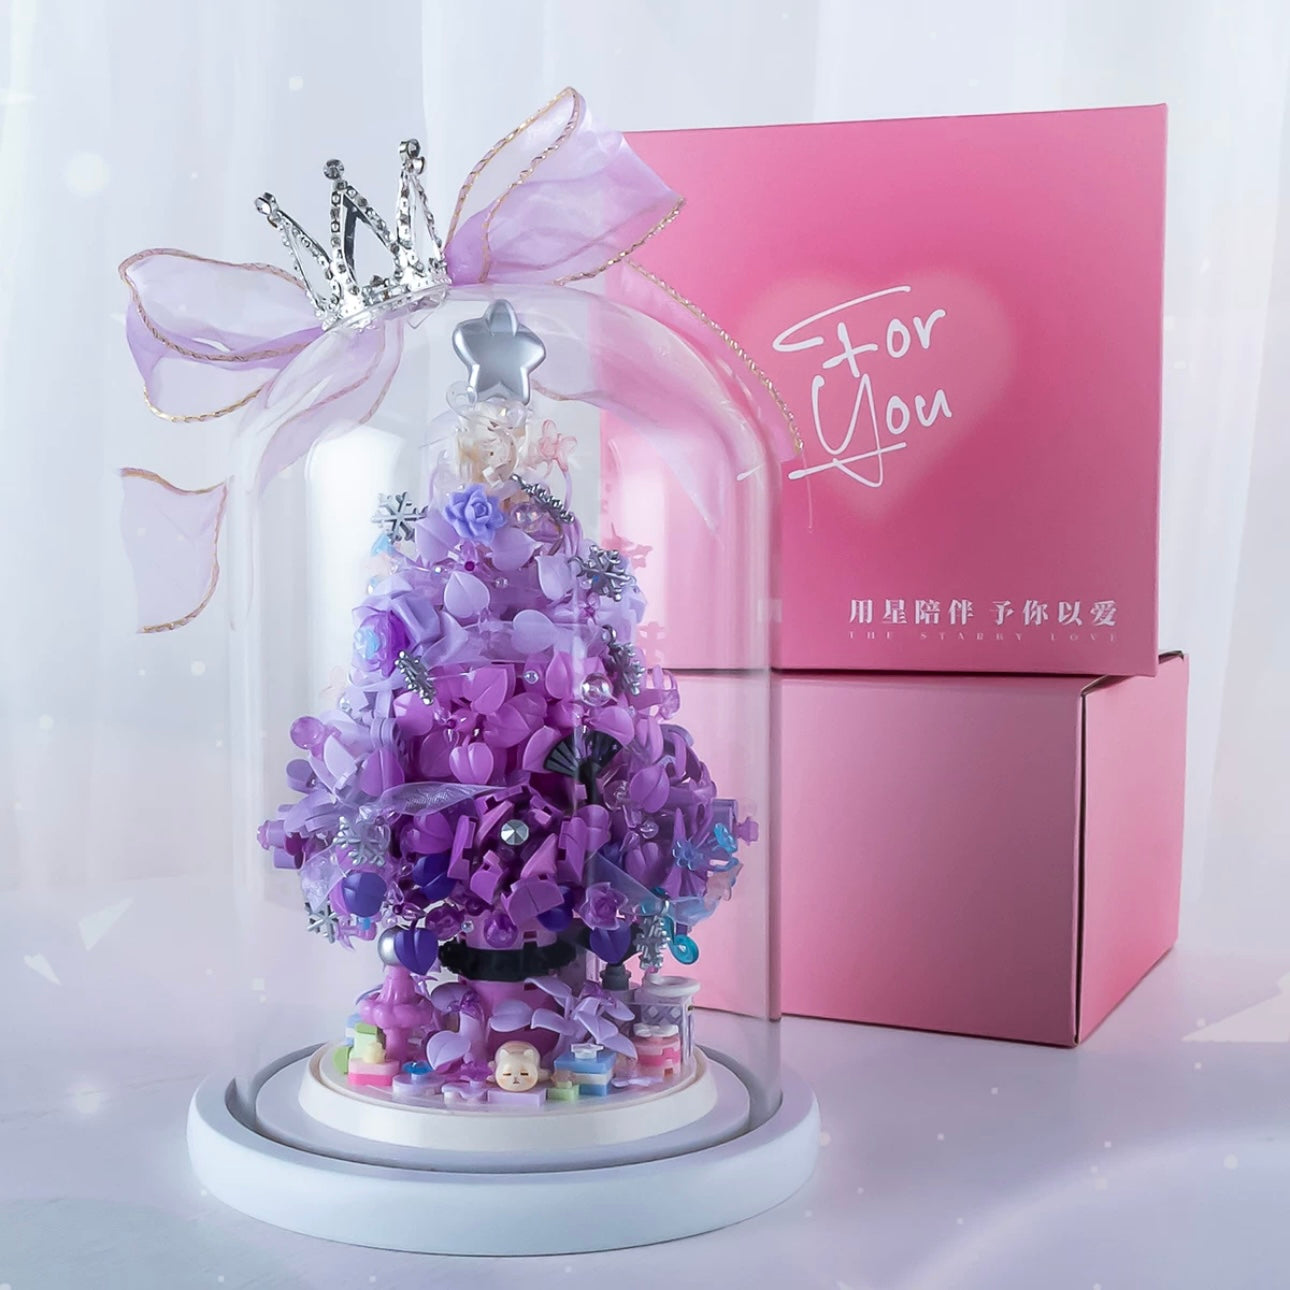 Mini Block Building Flower Christmas Tree with Cover | Pink Purple - with LED Lights Valentine Gift DIY Handmade Xmas Gift